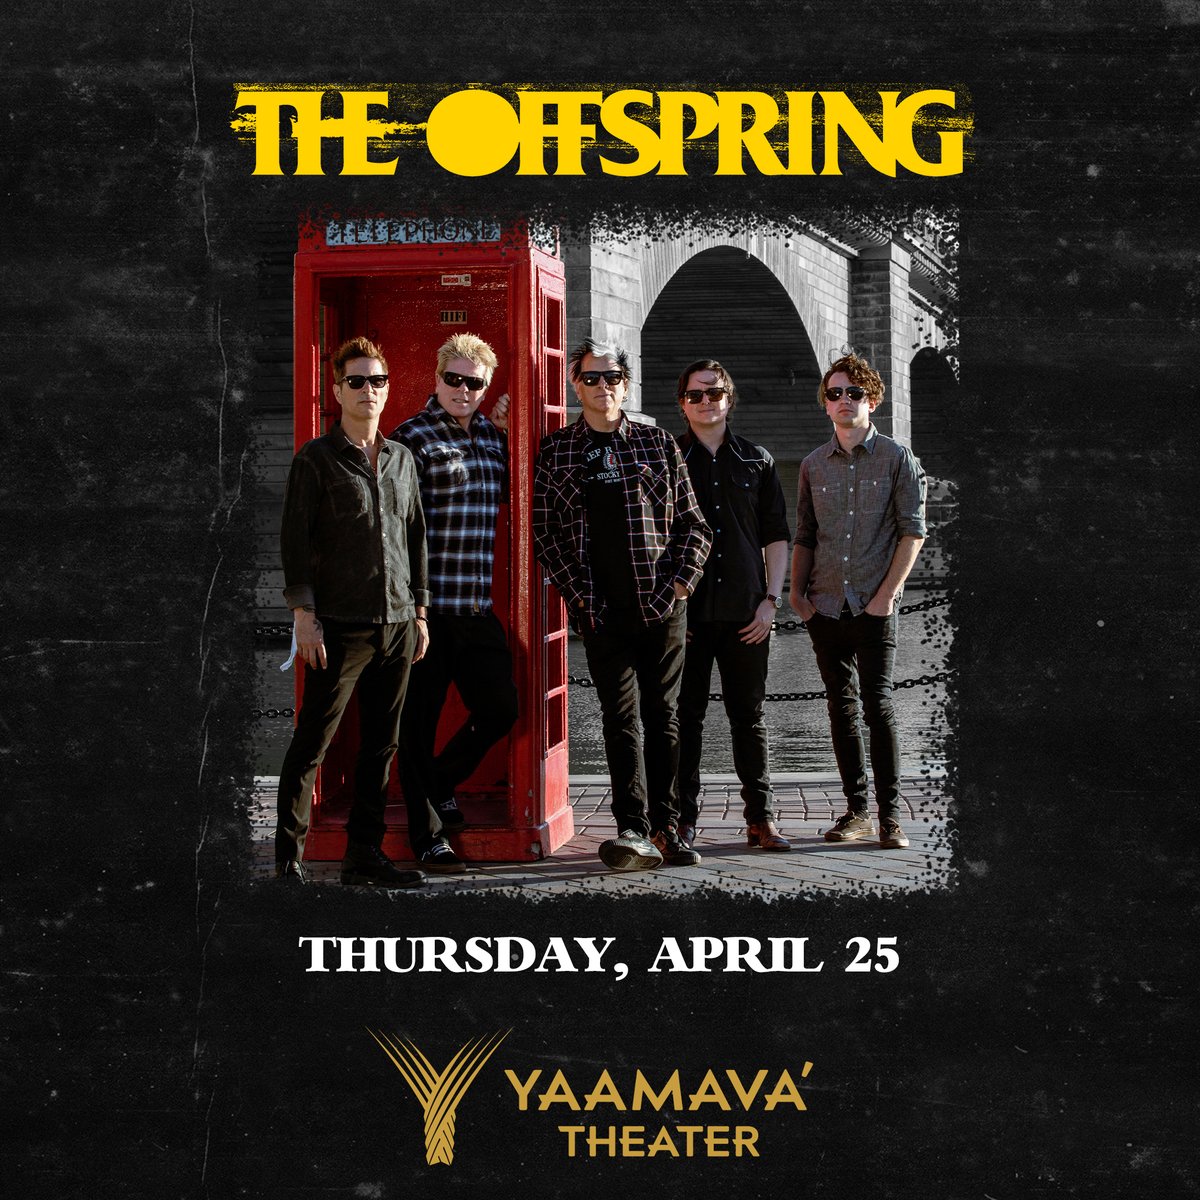 HIGHLAND, CA! We’re coming back to @Yaamava this Thursday, April 25th! Only a small # of tickets are still available at: brnw.ch/21wHlq9